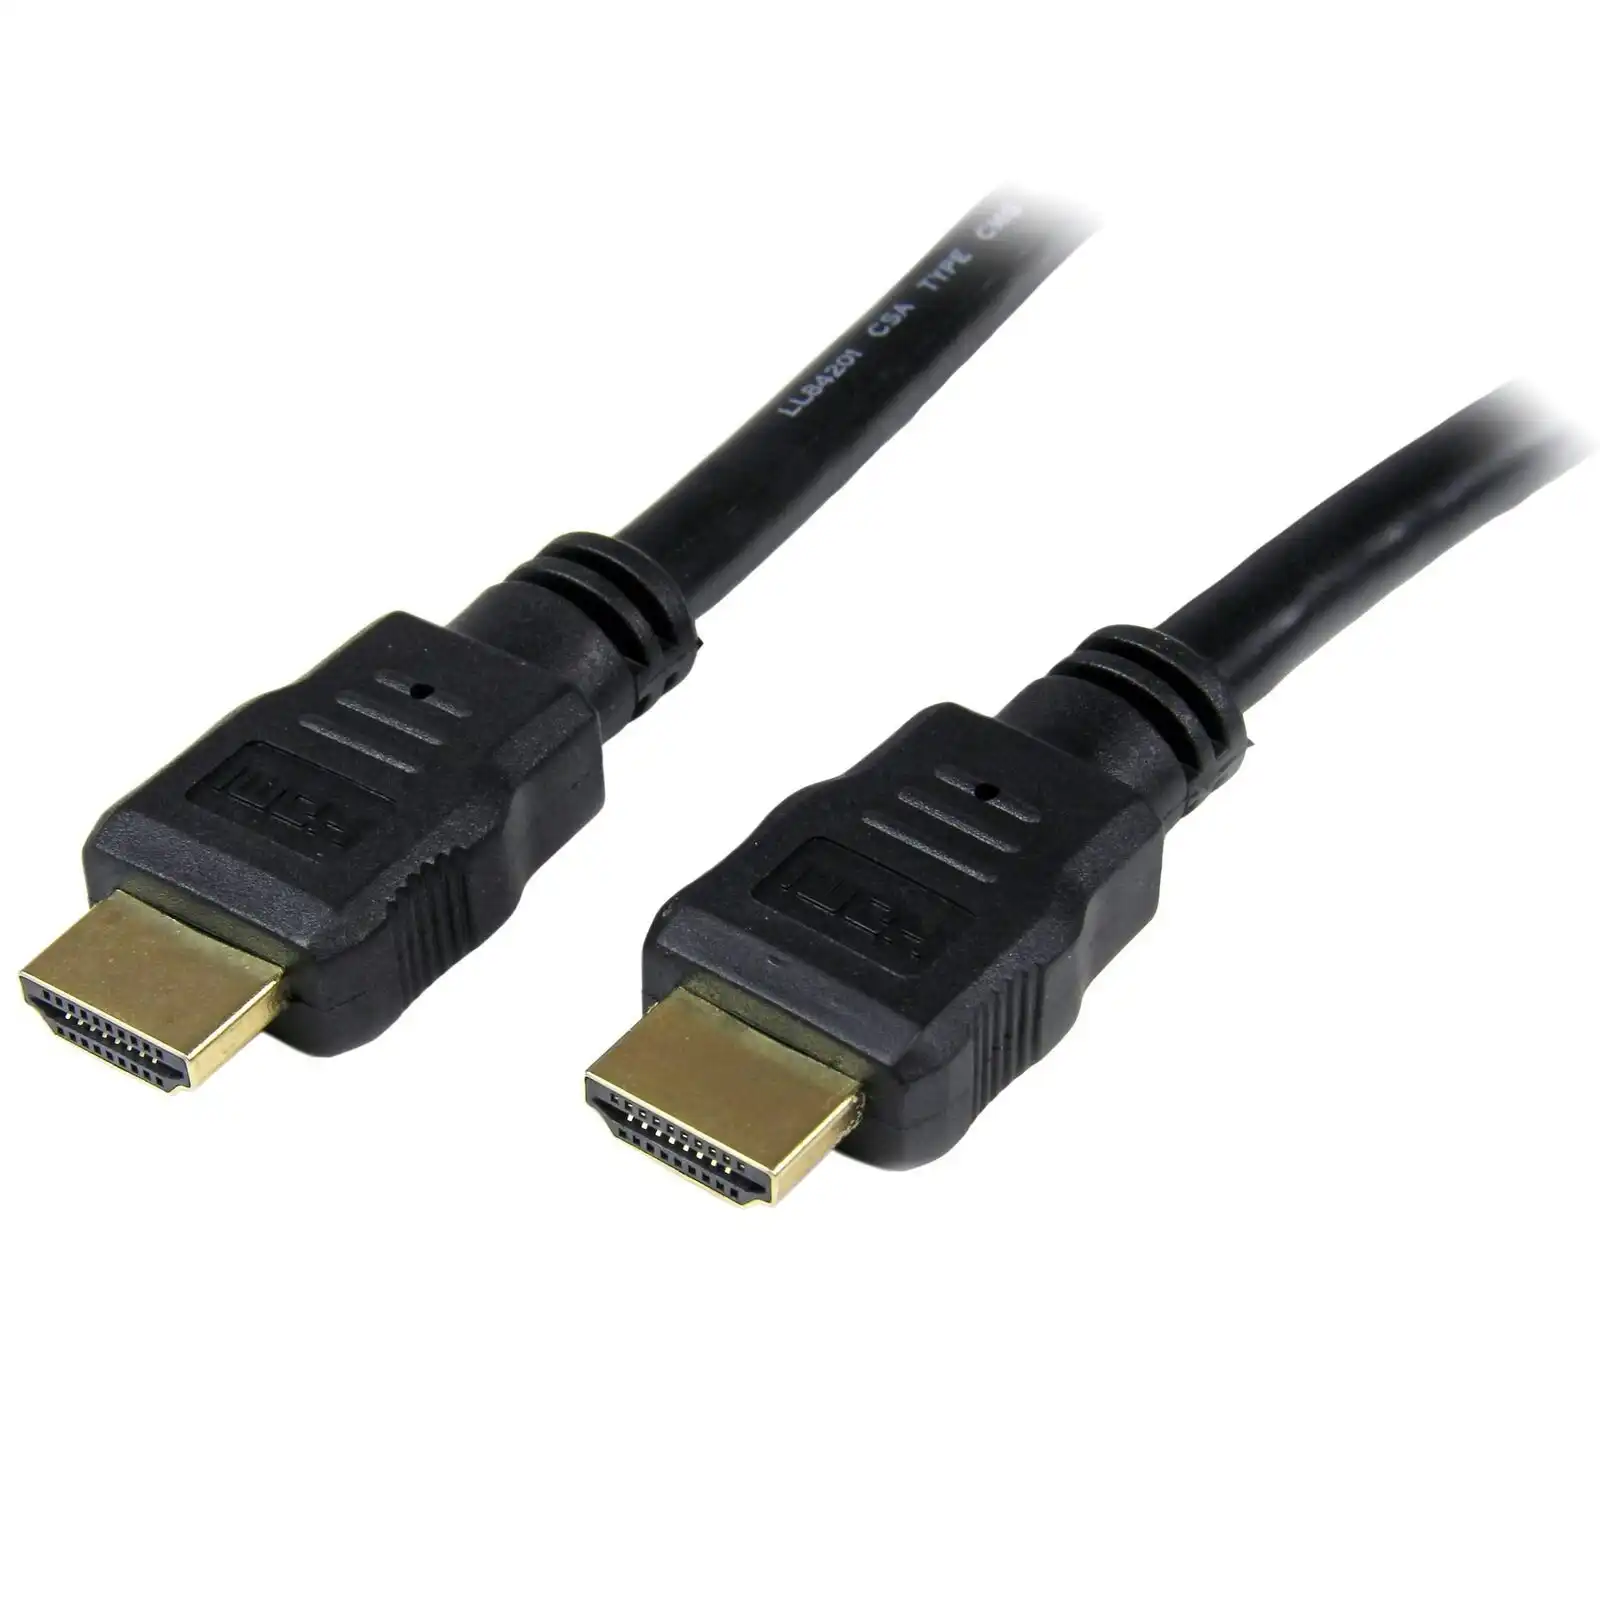 Star Tech 3M 4K/2K UHD Gold Plated Male/Male HDMI 1.4 Cable for HDTV/DVD Black